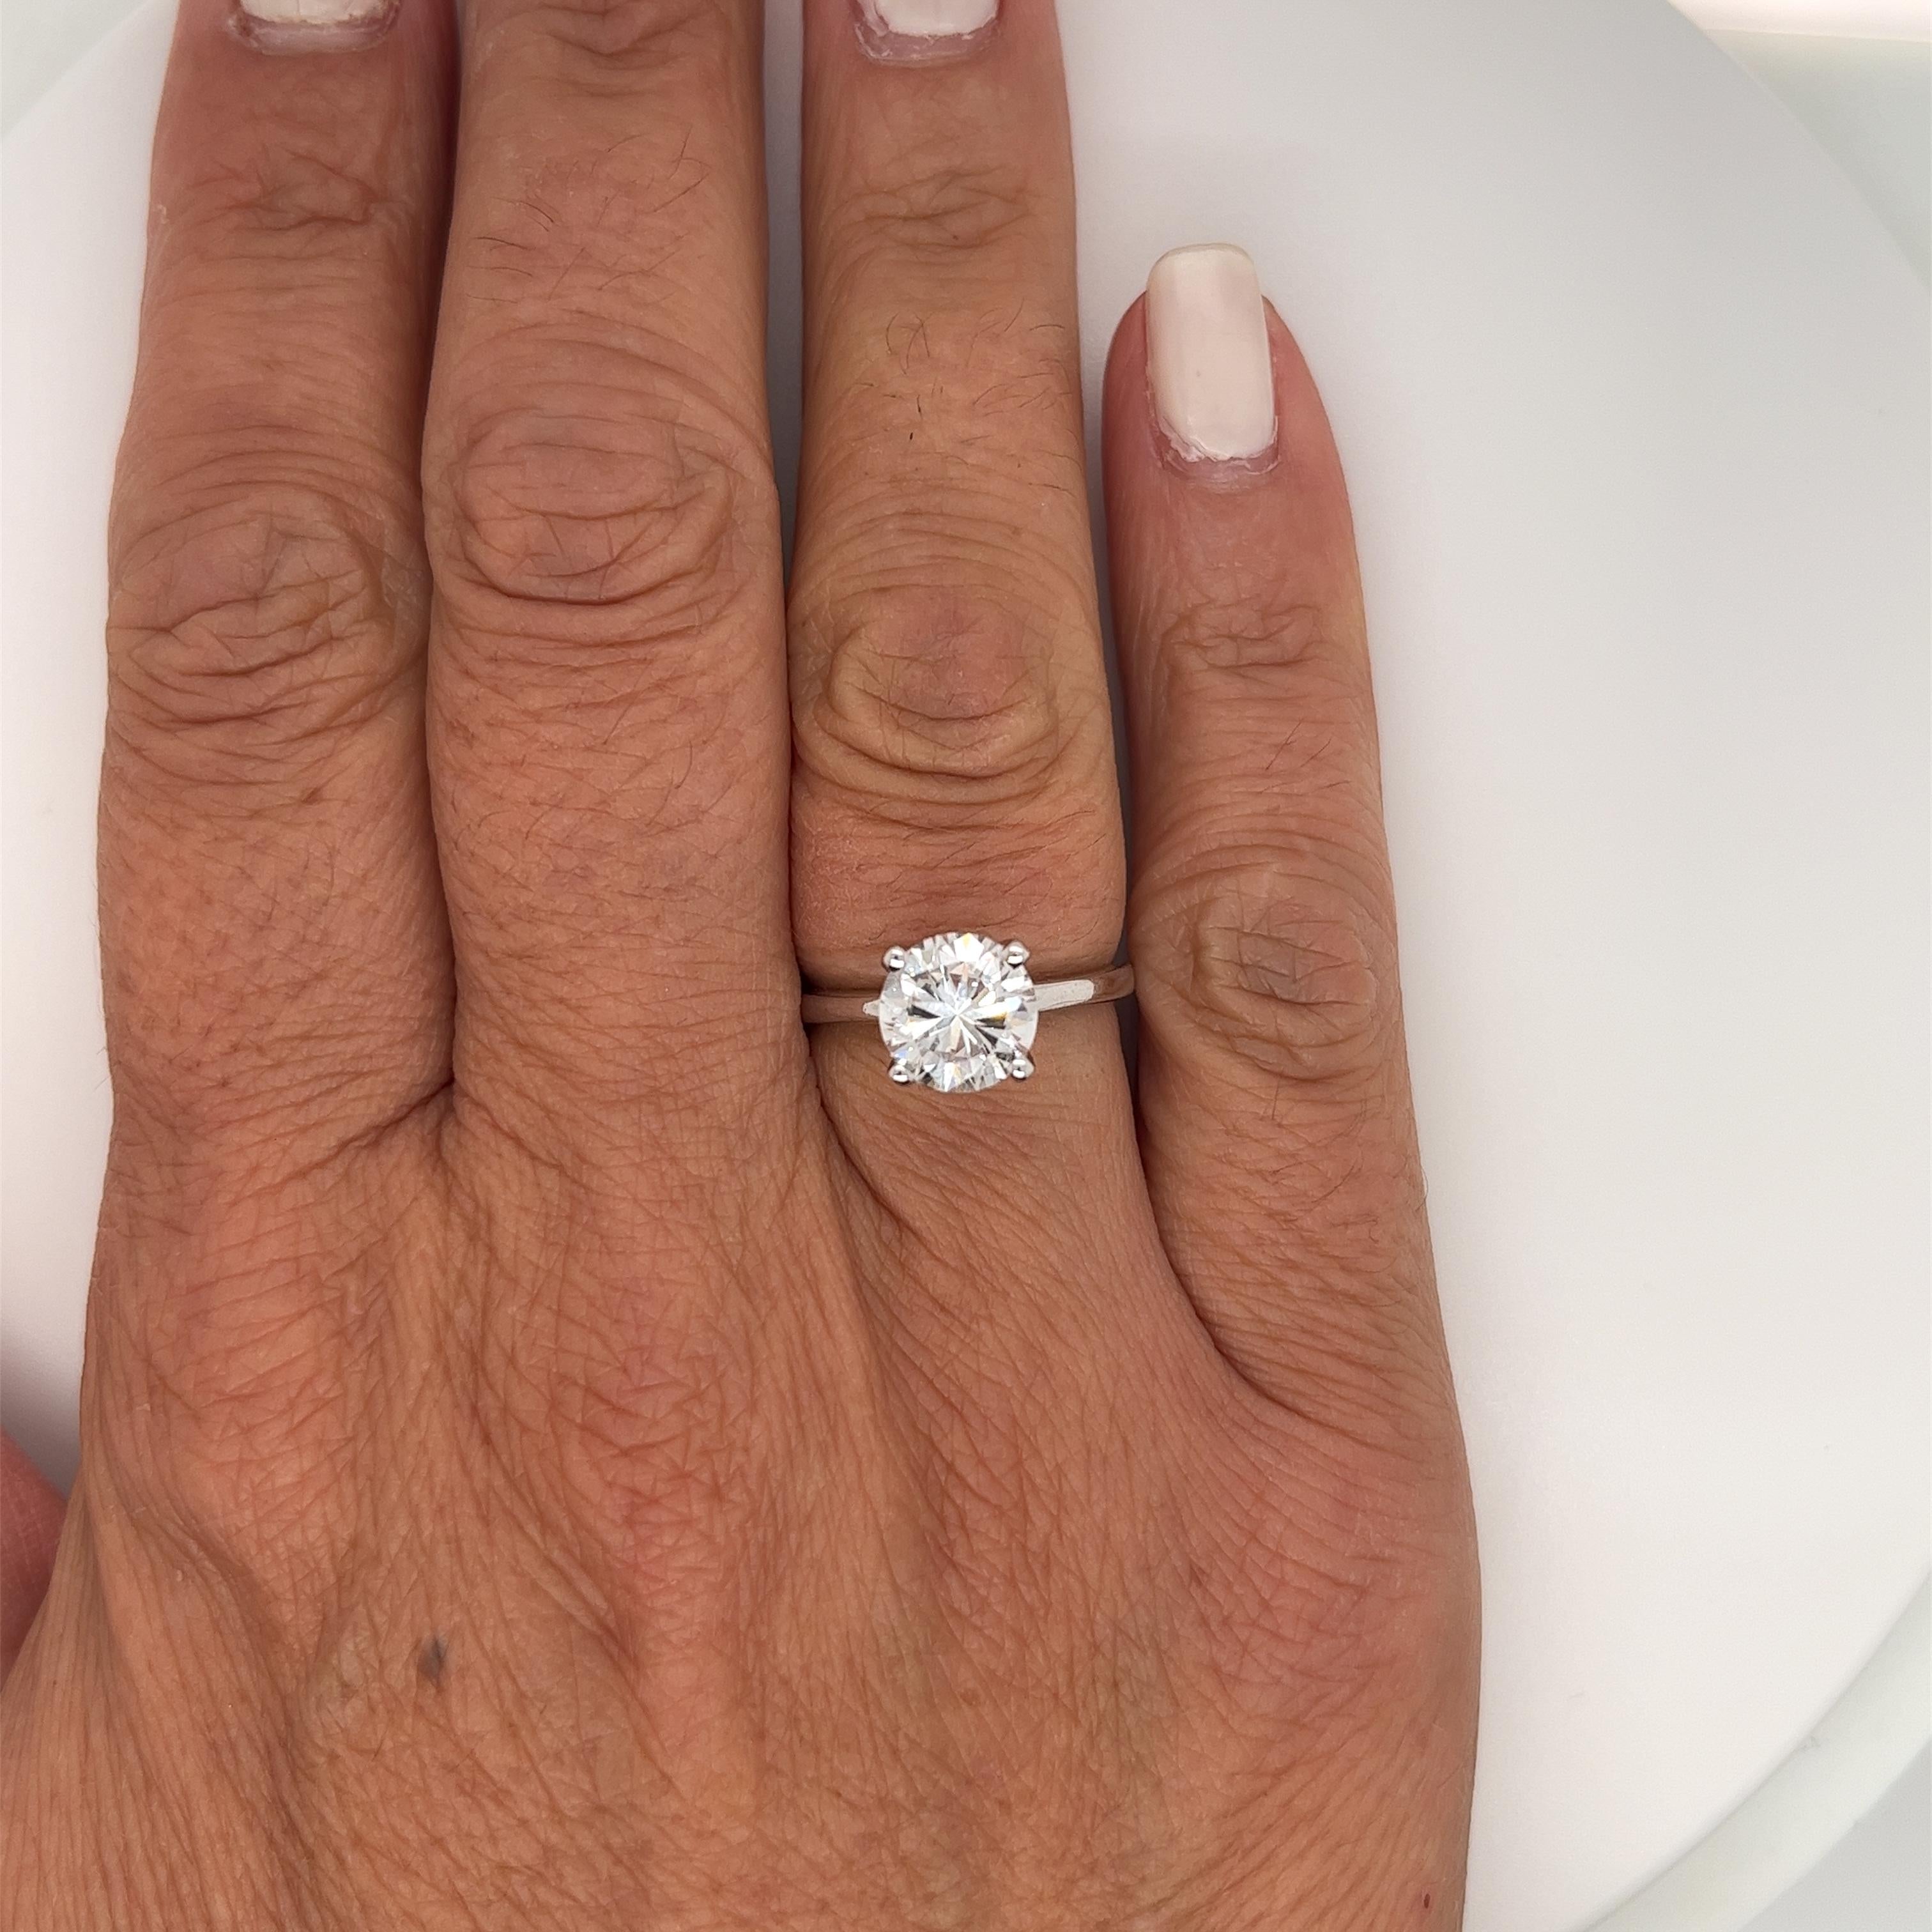 GIA Certified 2.02 Carat D color VVS2 Clarity Diamond Solitaire White Gold Ring In New Condition For Sale In Miami, FL